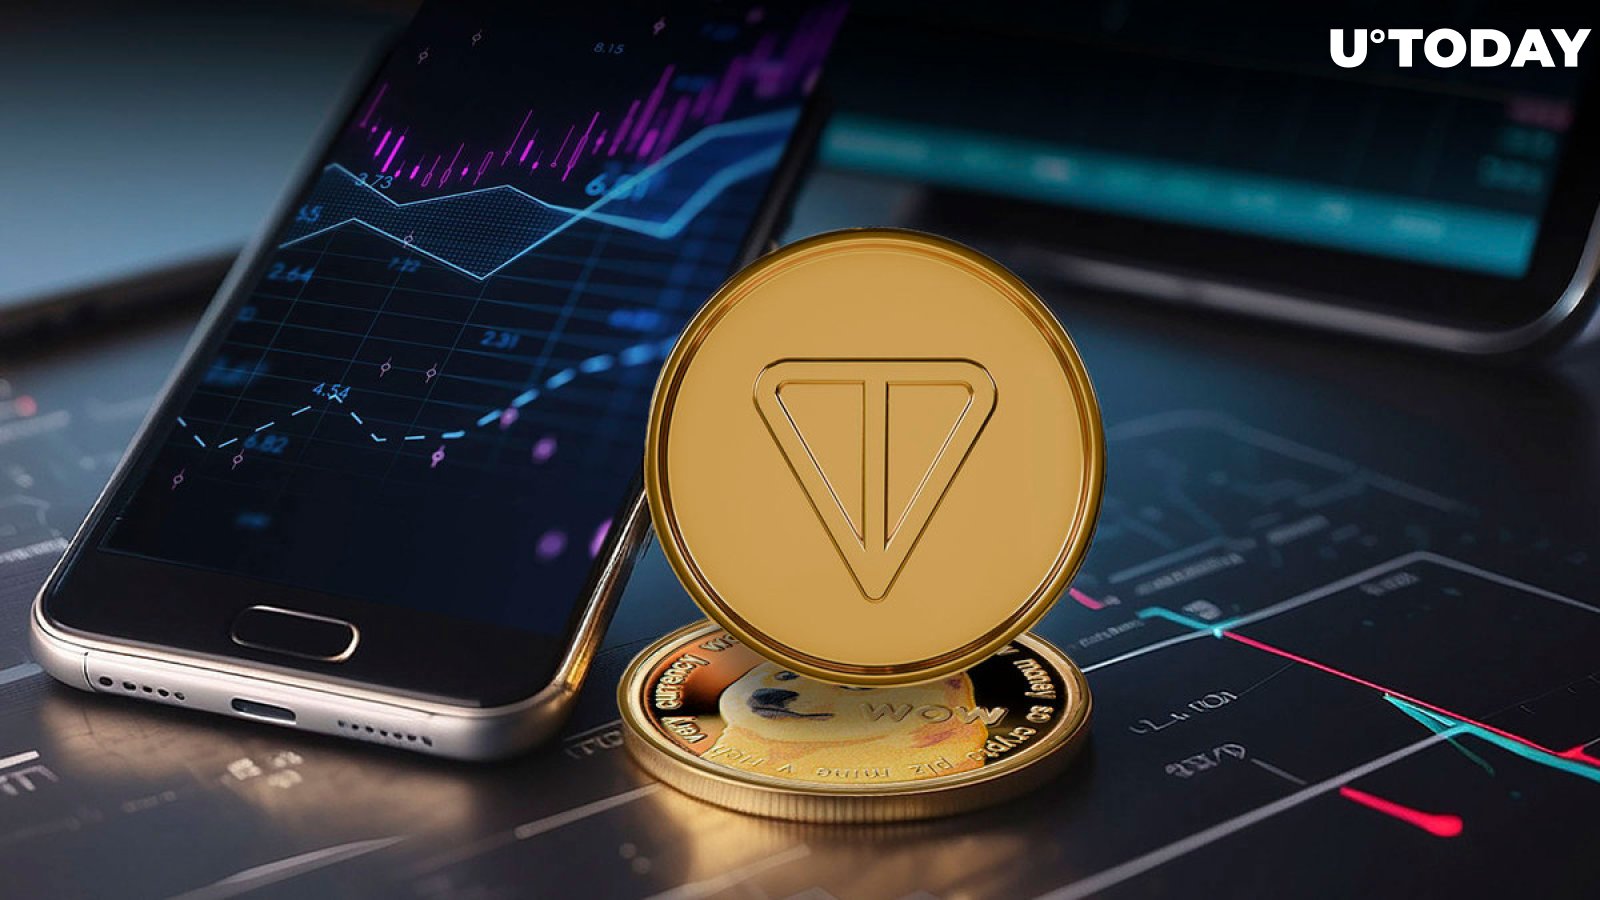 Toncoin (TON) Surpasses Dogecoin (DOGE) in Market Cap, Following 50% Volume Growth